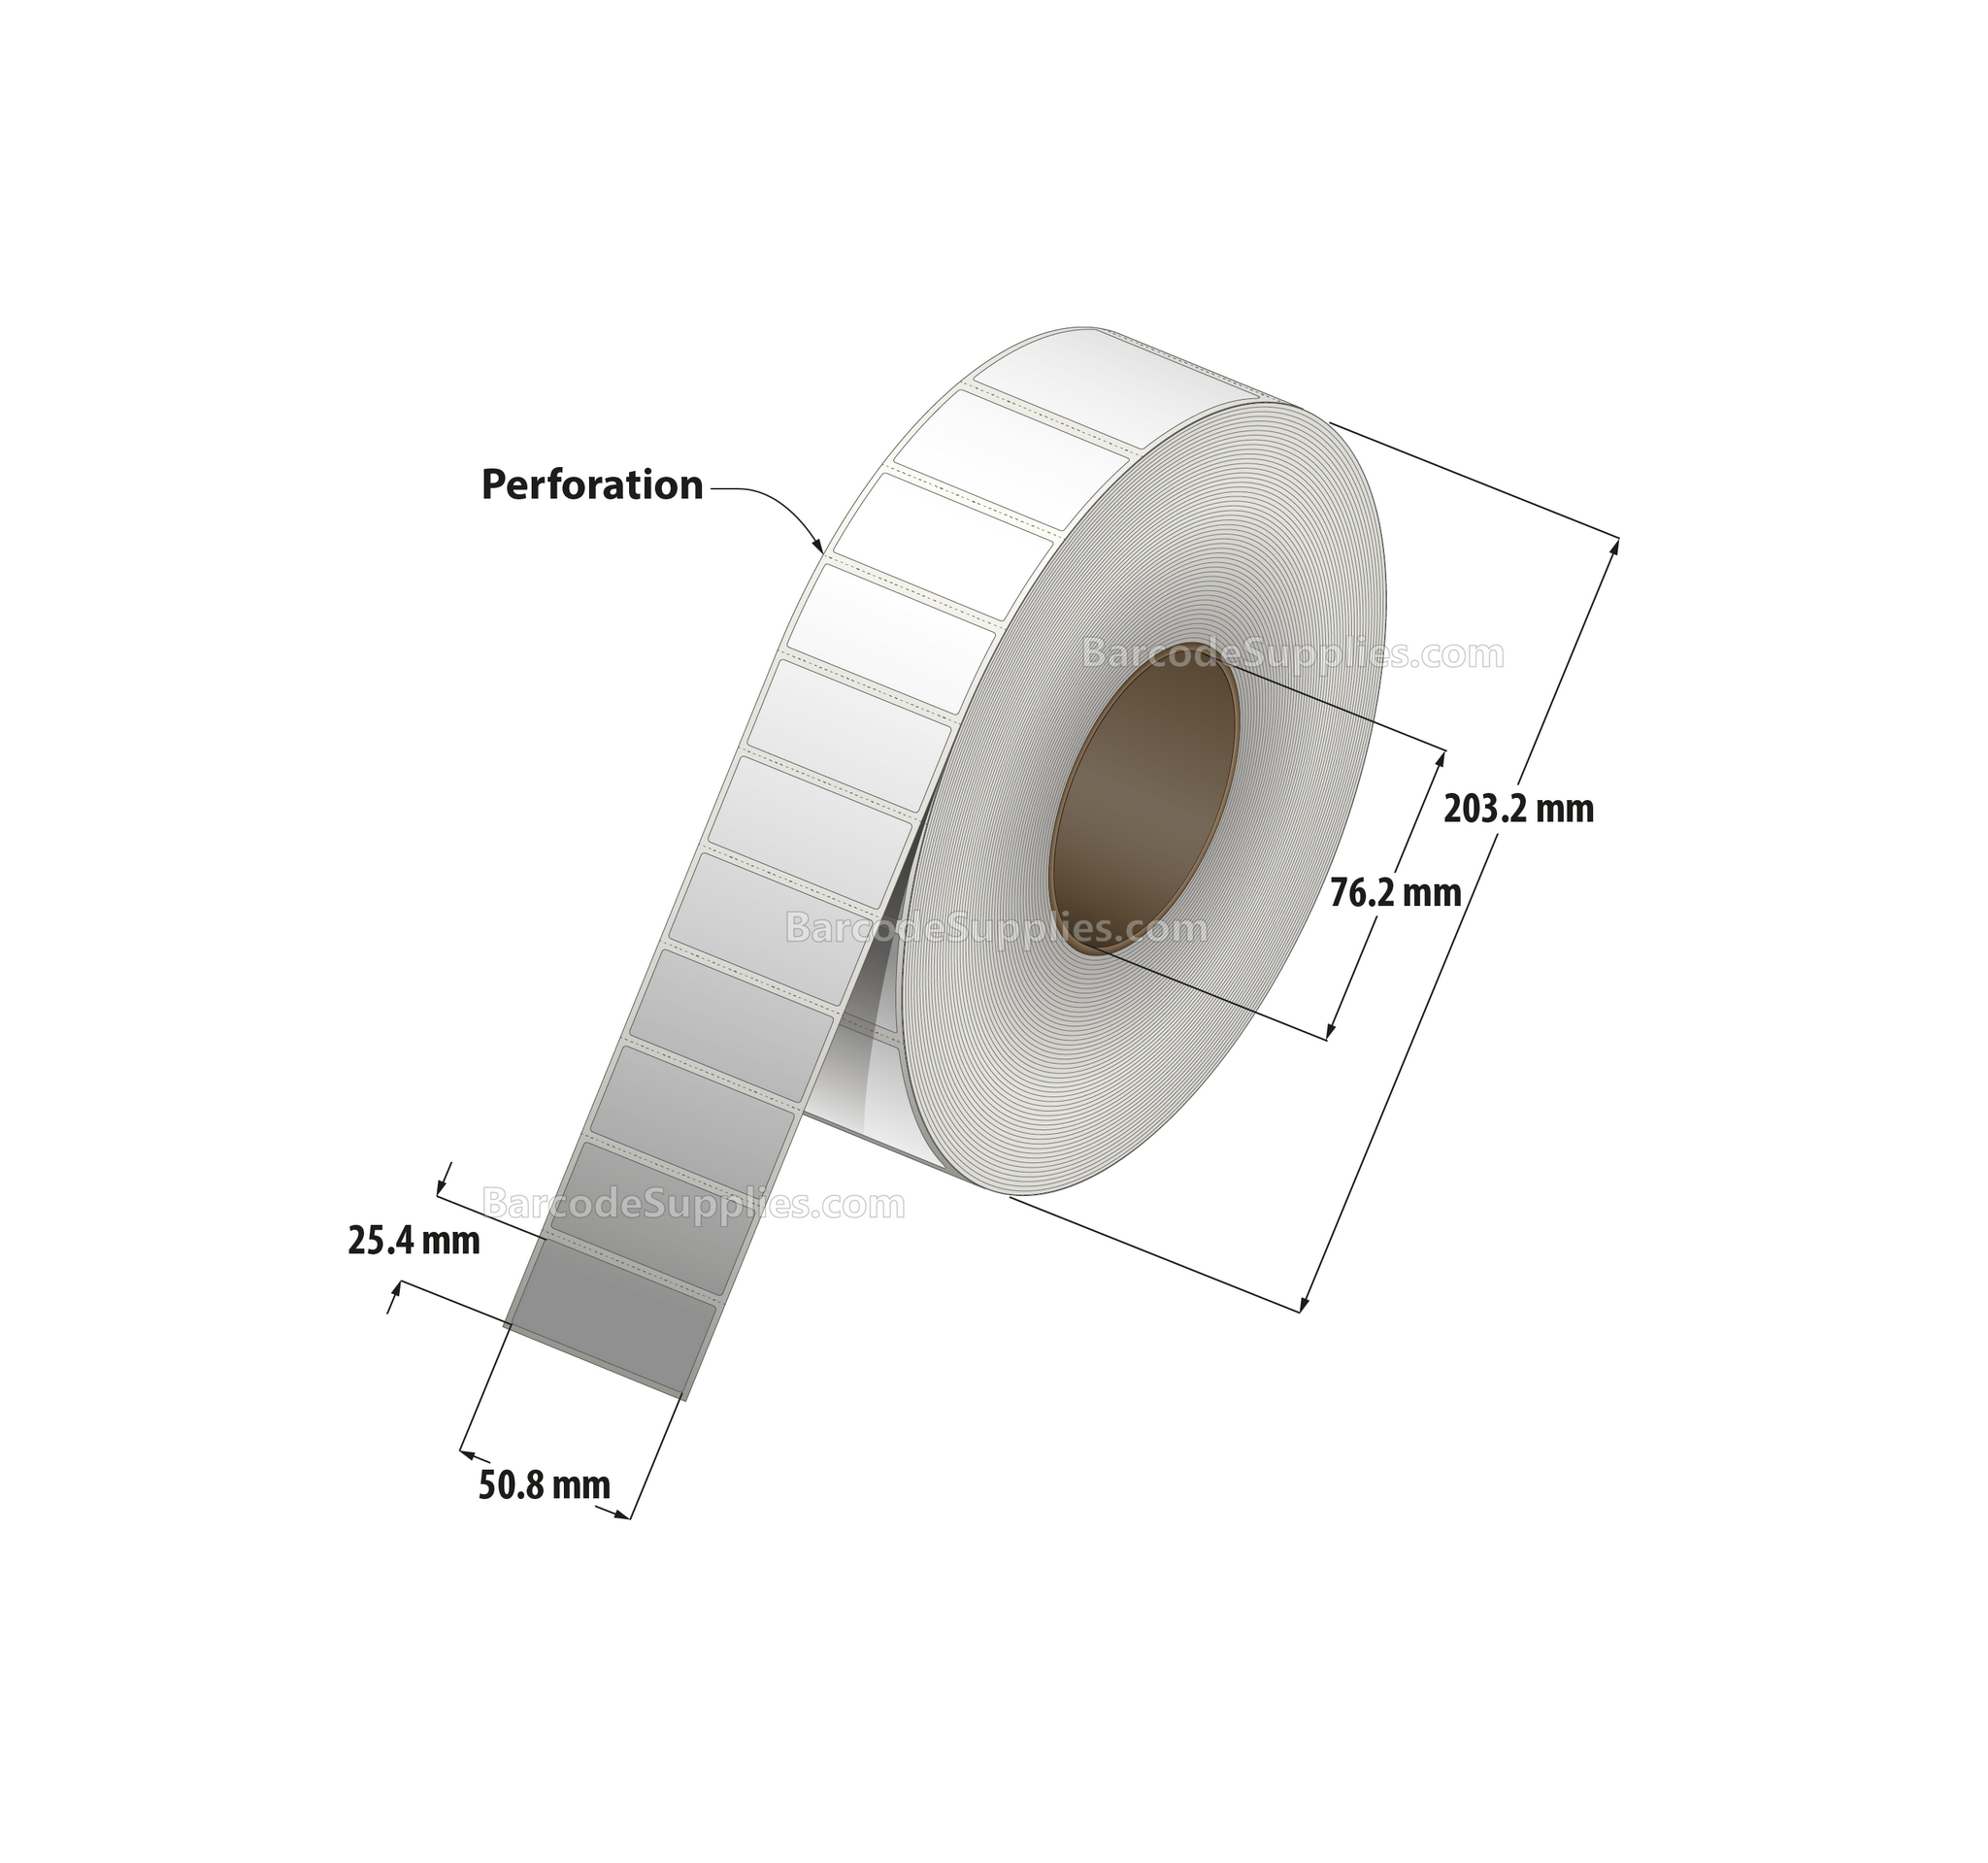 2 x 1 Thermal Transfer White Labels With Removable Adhesive - Perforated - 5500 Labels Per Roll - Carton Of 8 Rolls - 44000 Labels Total - MPN: RE-2-1-5500-3